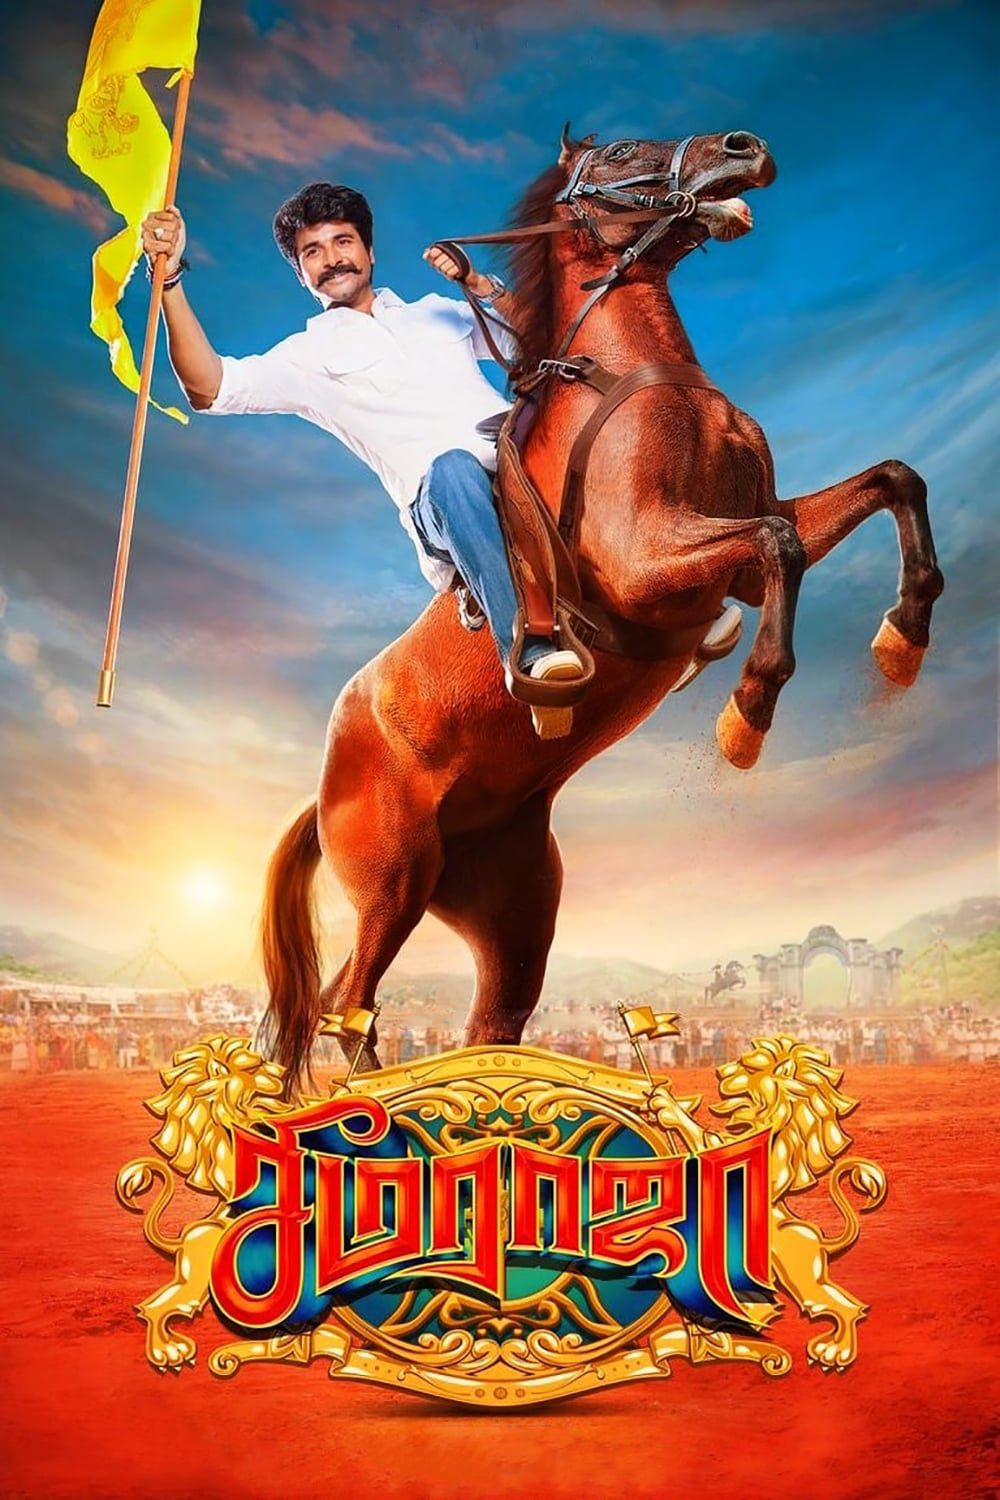 Poster for the movie "Seemaraja"